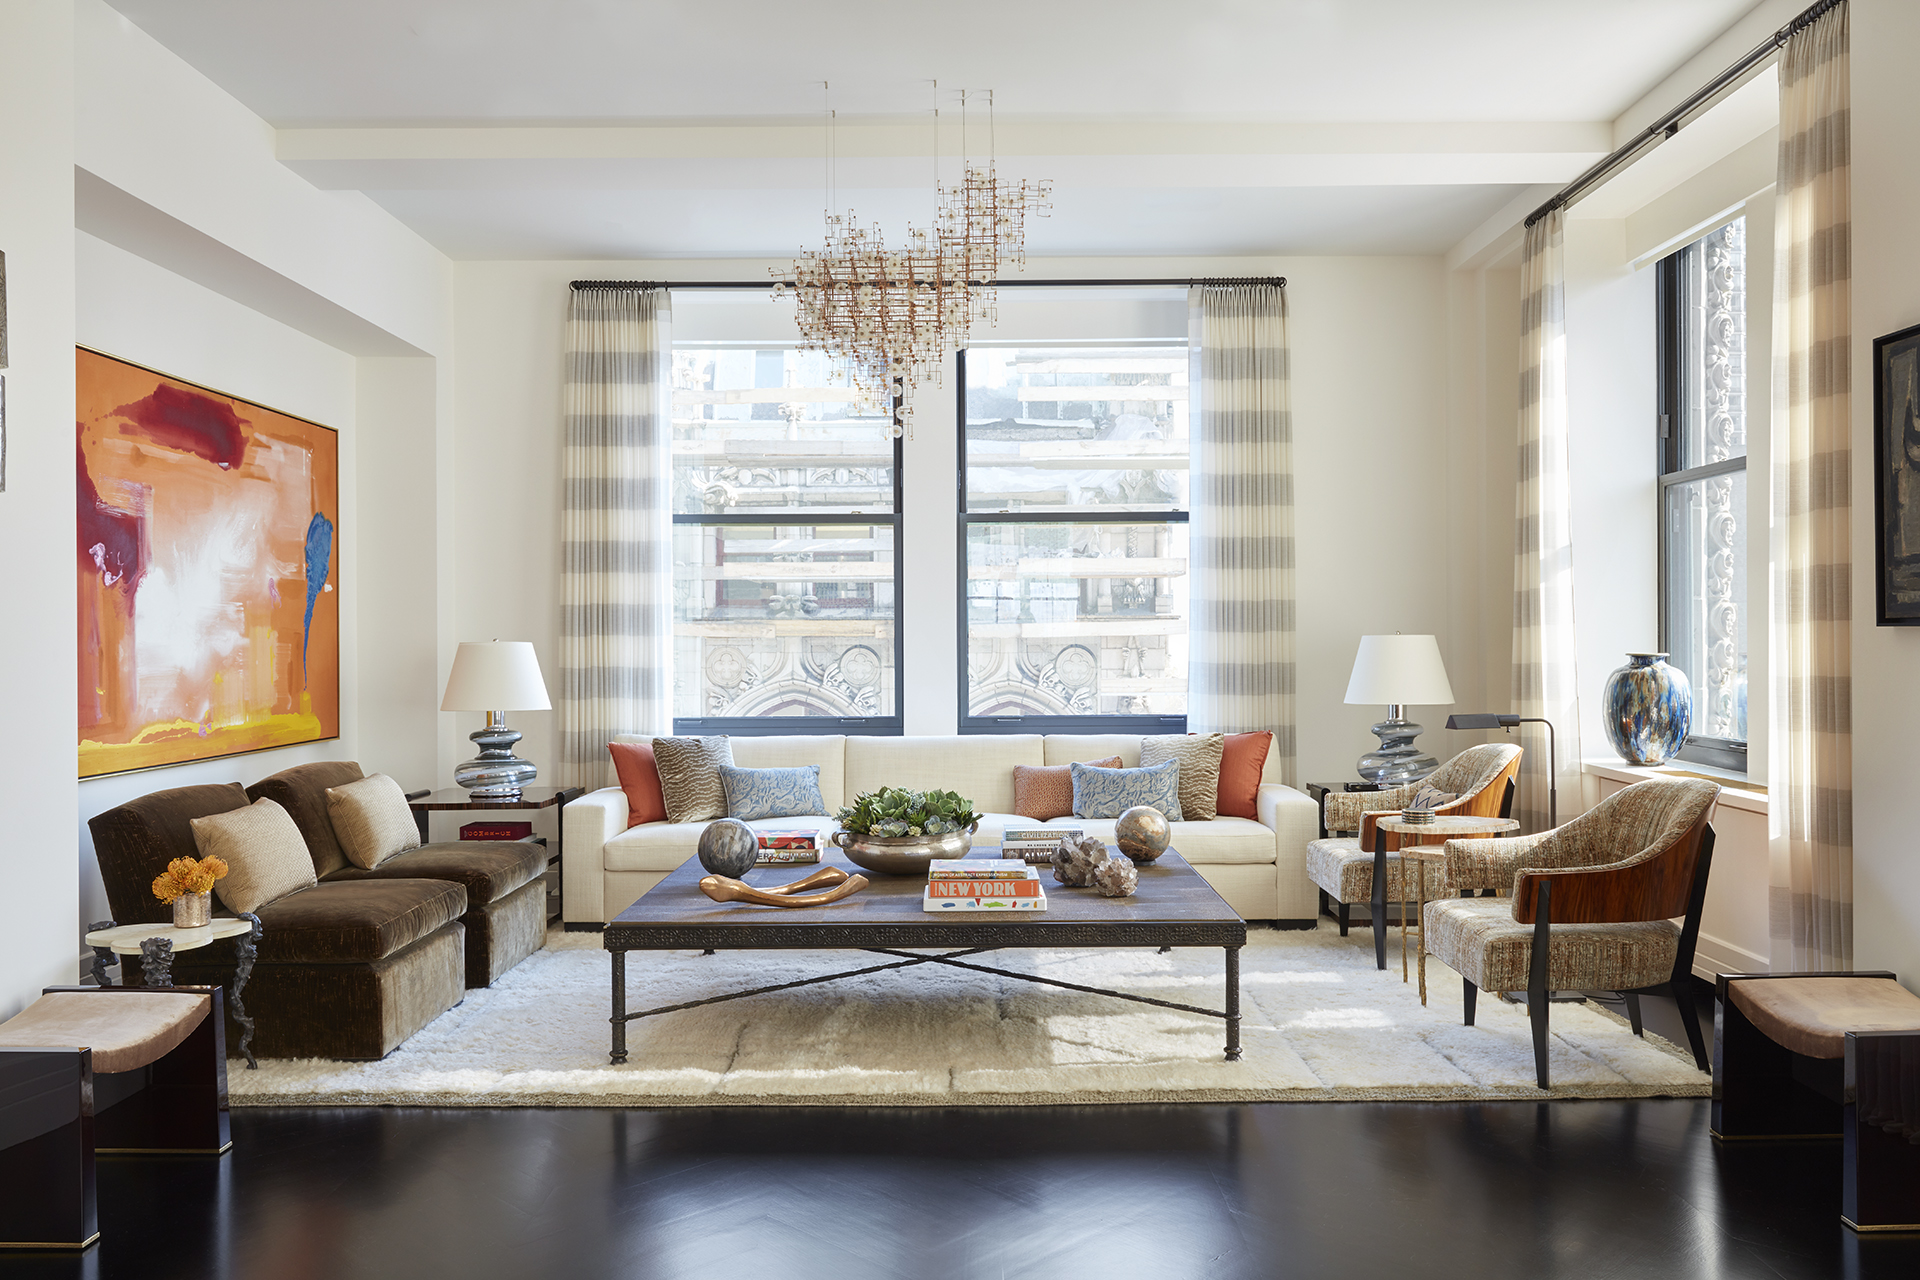 Tour a Major Collector's Art-Filled New York Pied-à-Terre - Galerie